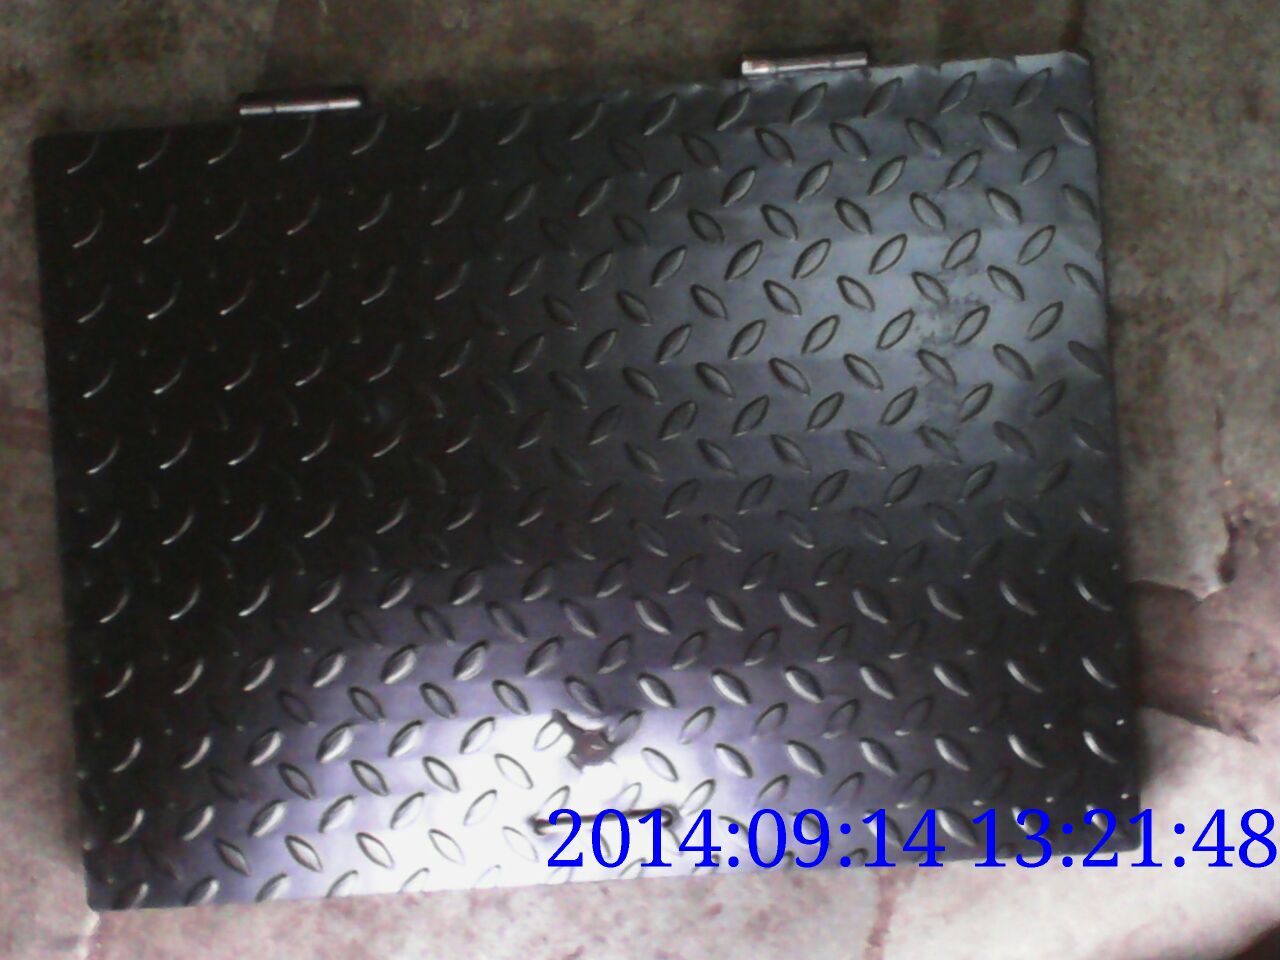 Maruti Suzuki MS(mild Steel) manhole cover for Used in underground water tank, also in drainage system